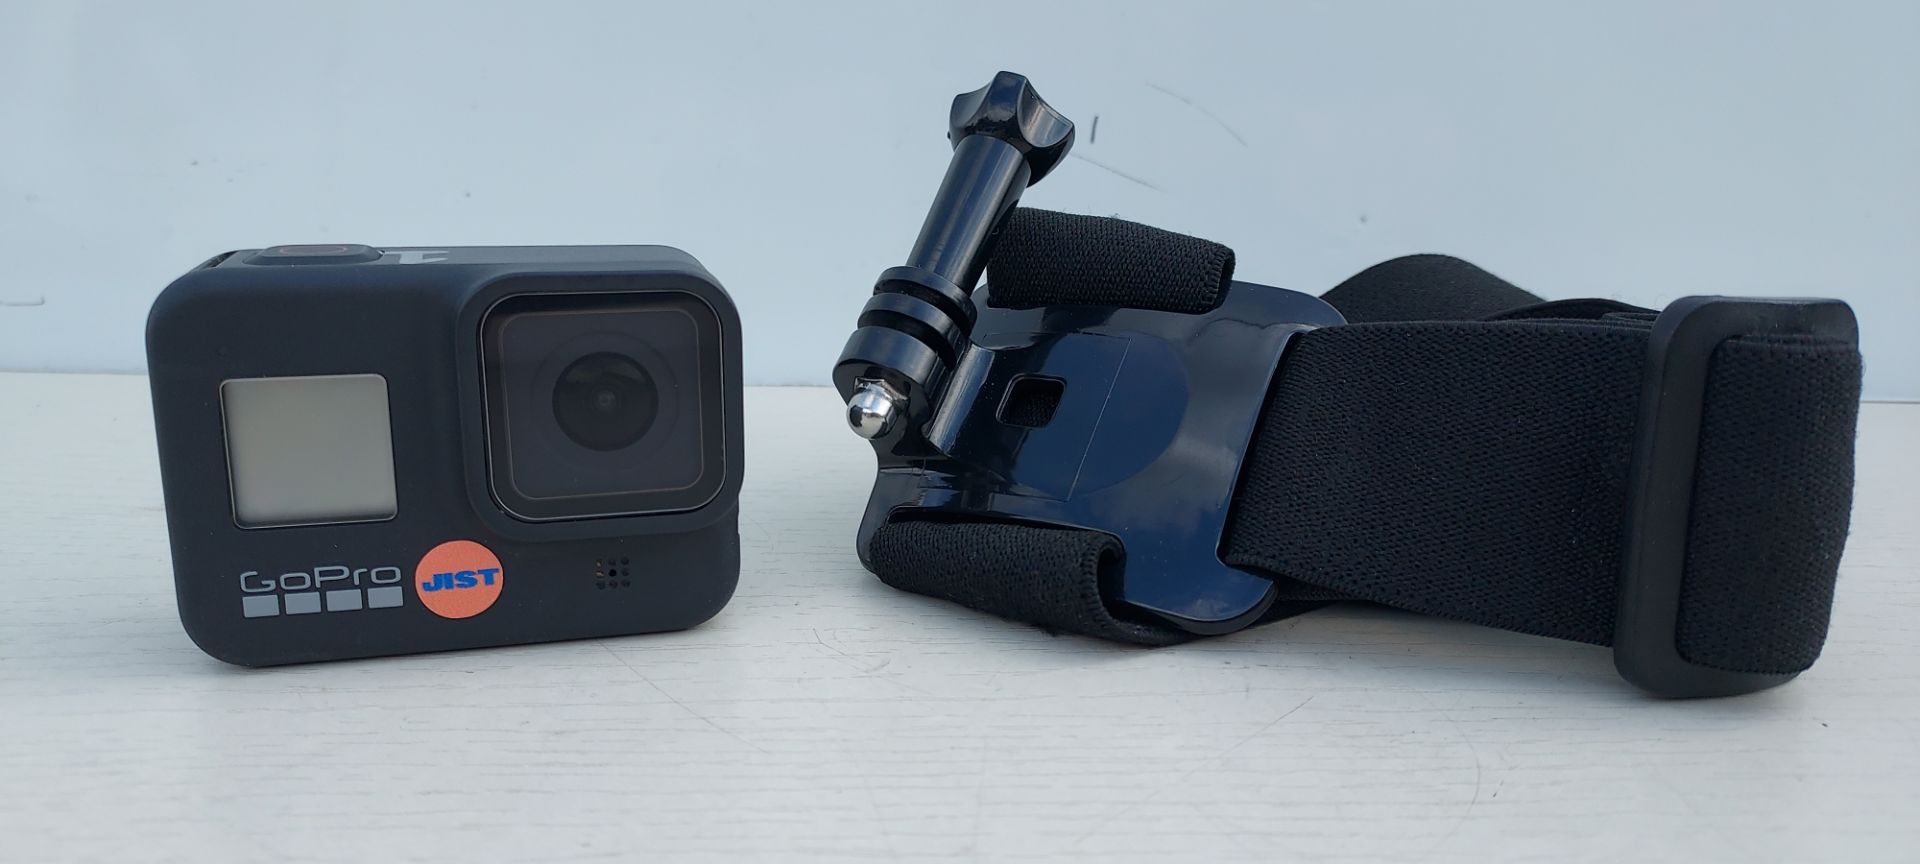 GOPRO HERO8 BLACK - WATERPROOF 4K DIGITAL ACTION CAMERA WITH HYPERSMOOTH STABILISATION, TOUCH SCREEN - Image 2 of 2